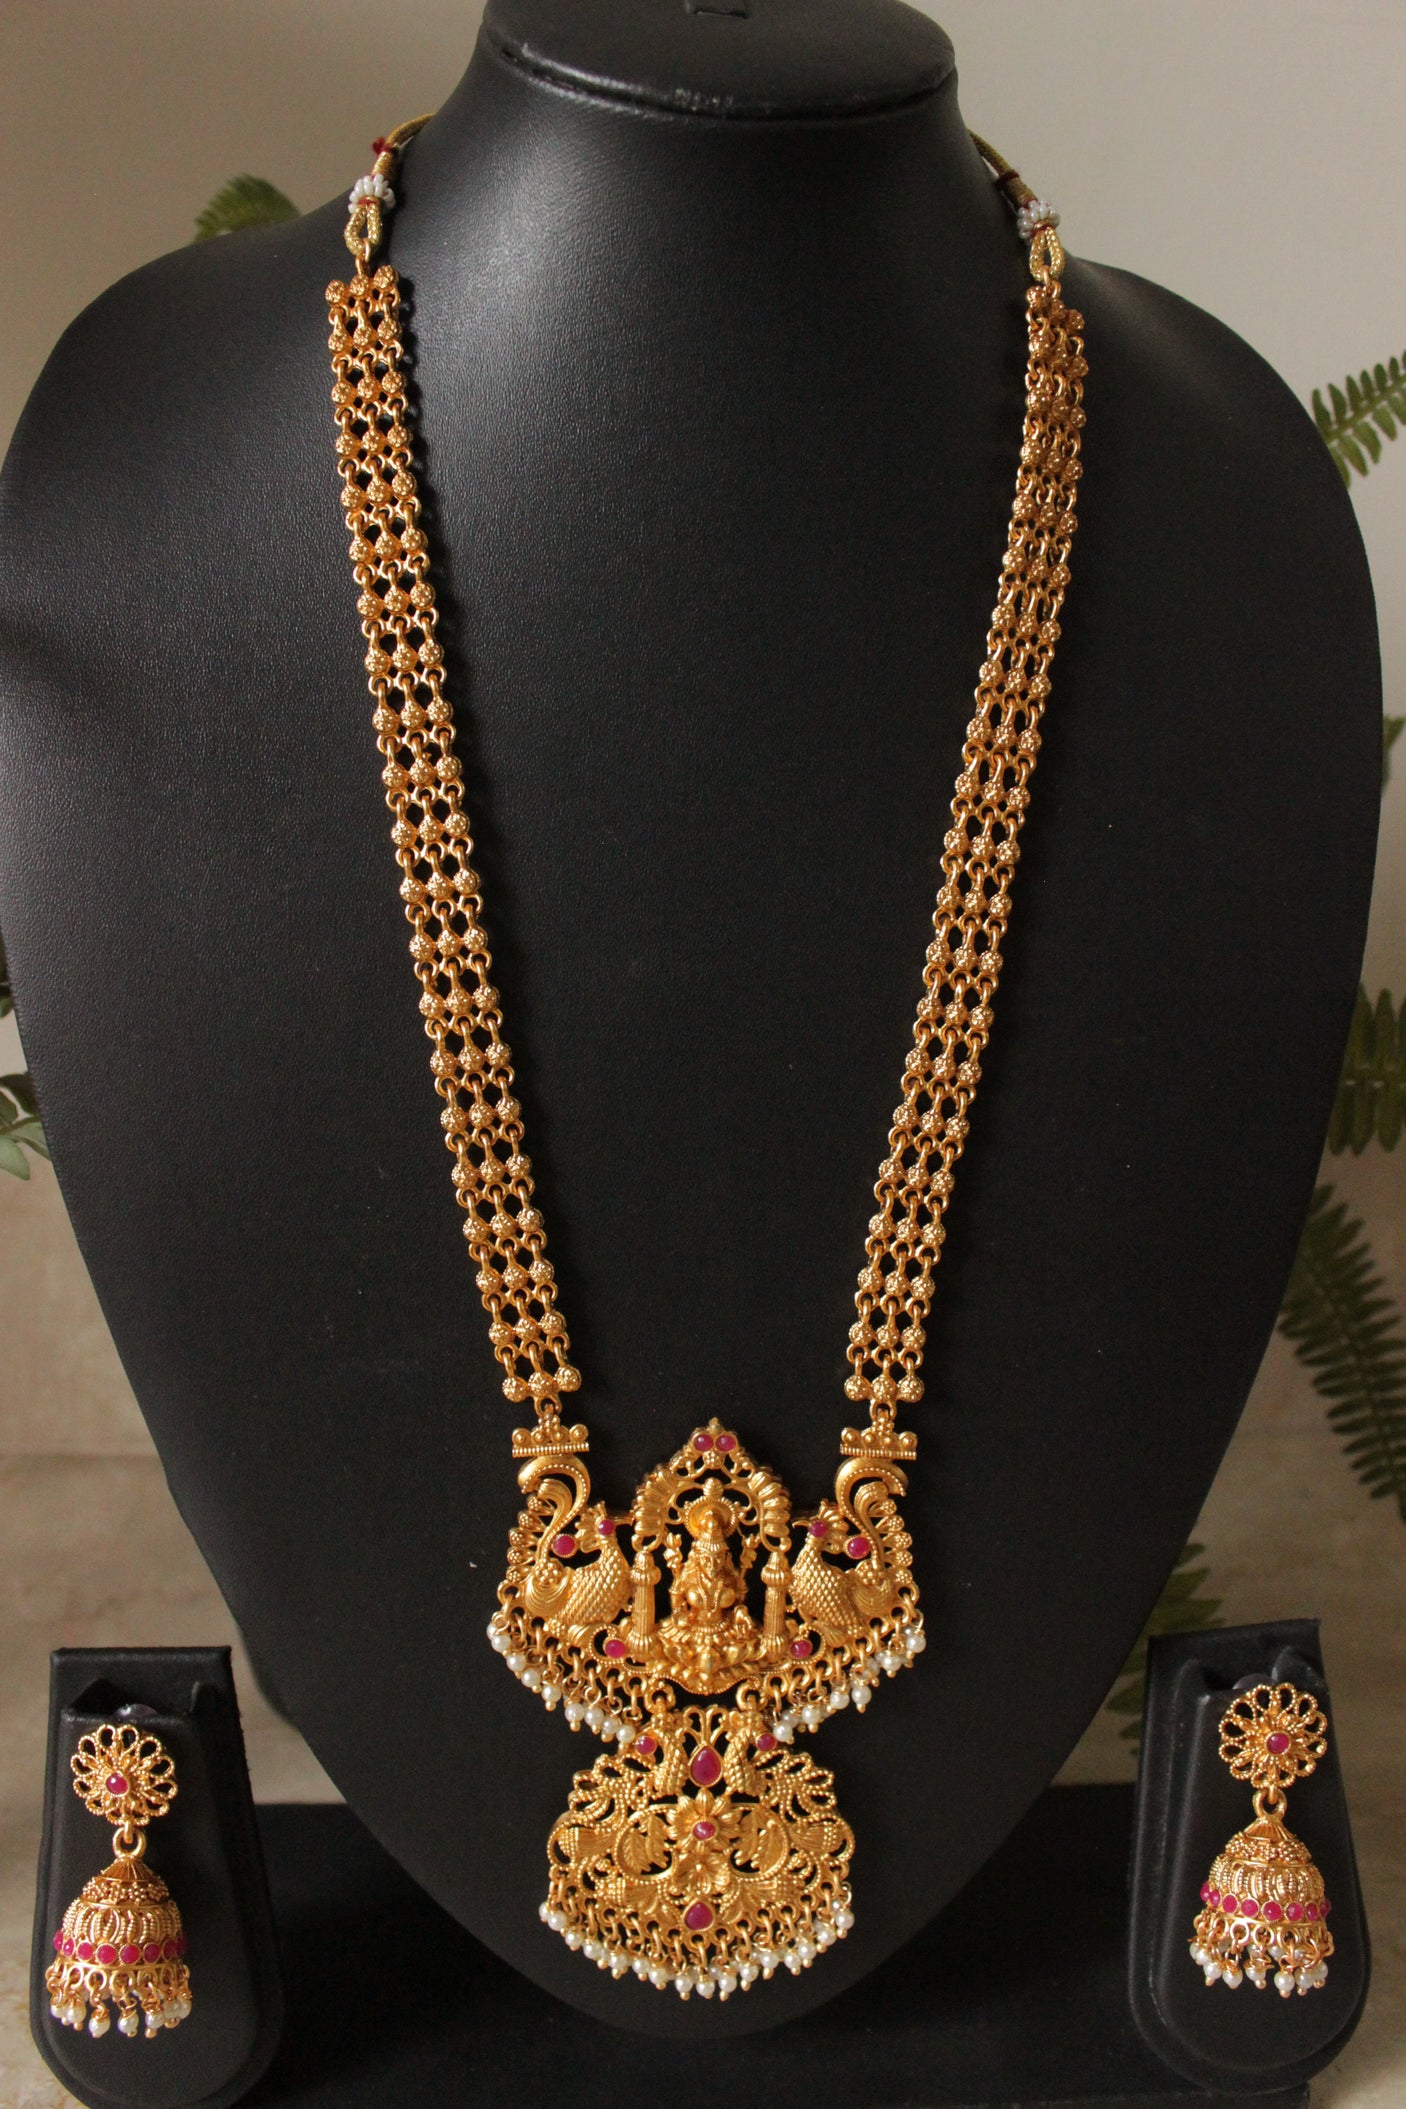 Dull Gold Finish Antique Religious Motifs Long Elaborate Temple Jewelry Necklace Set